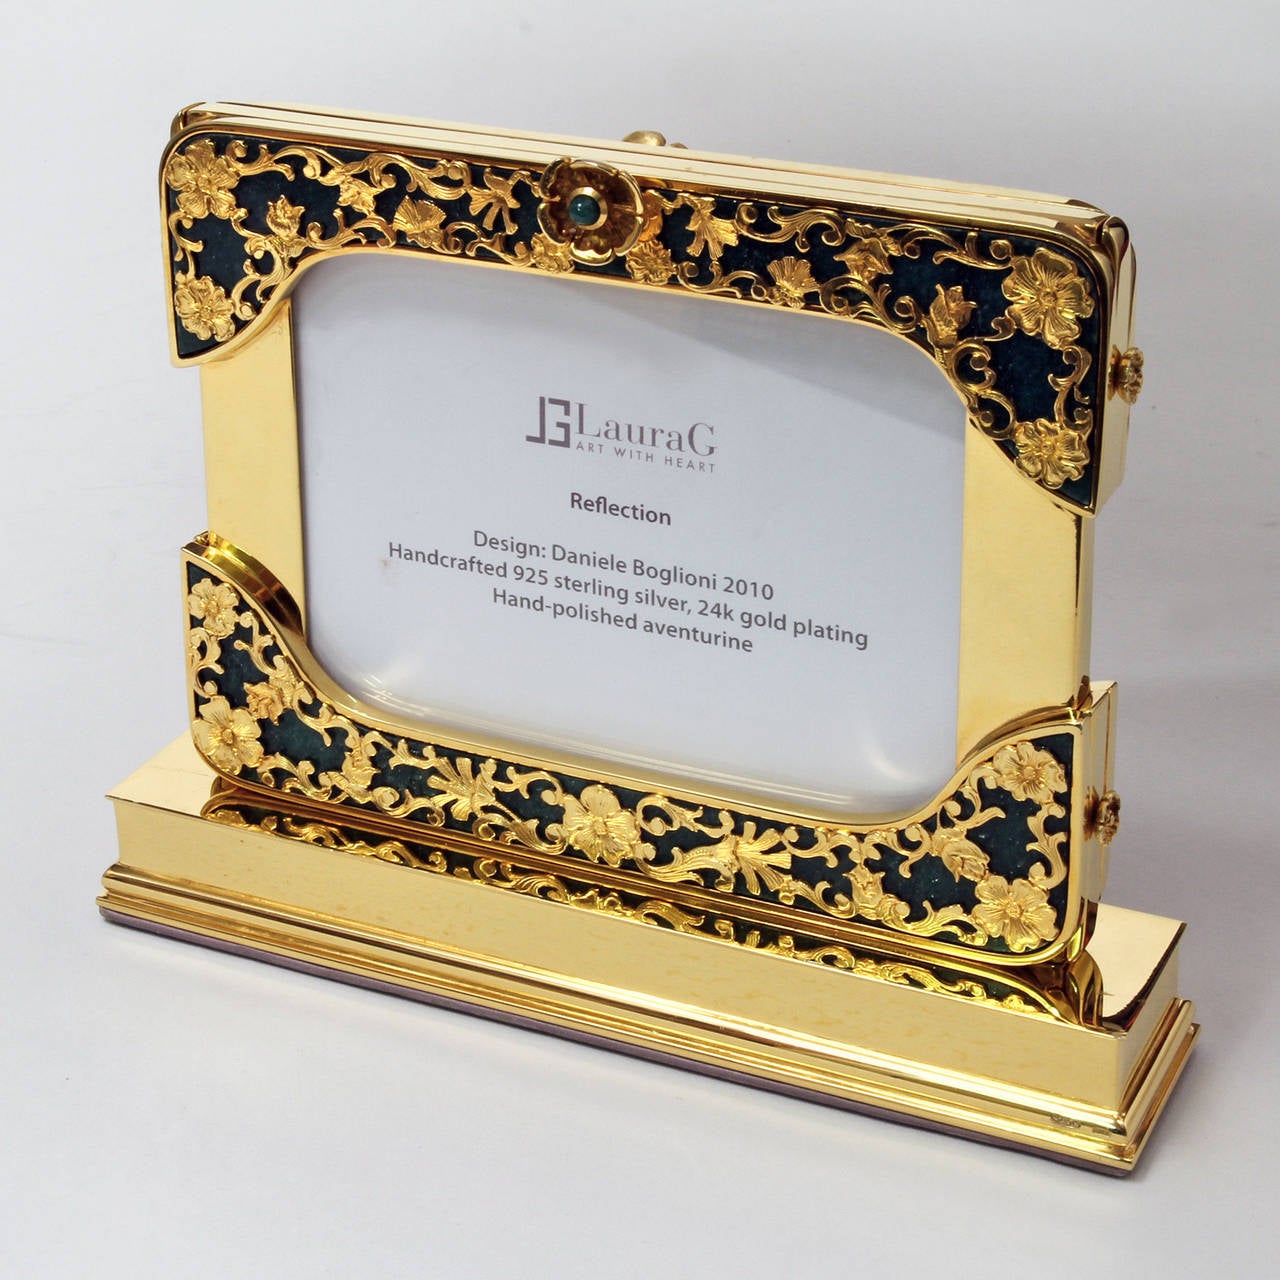 Reflection is tha name of this gorgeous photo frame signed Laura G Art with heart. It is handcrafted  in 925 sterling  silver gold plated  24 k and it is the oldest piece of the collection Art with Heart ,Delicately formed floral shapes branch out a